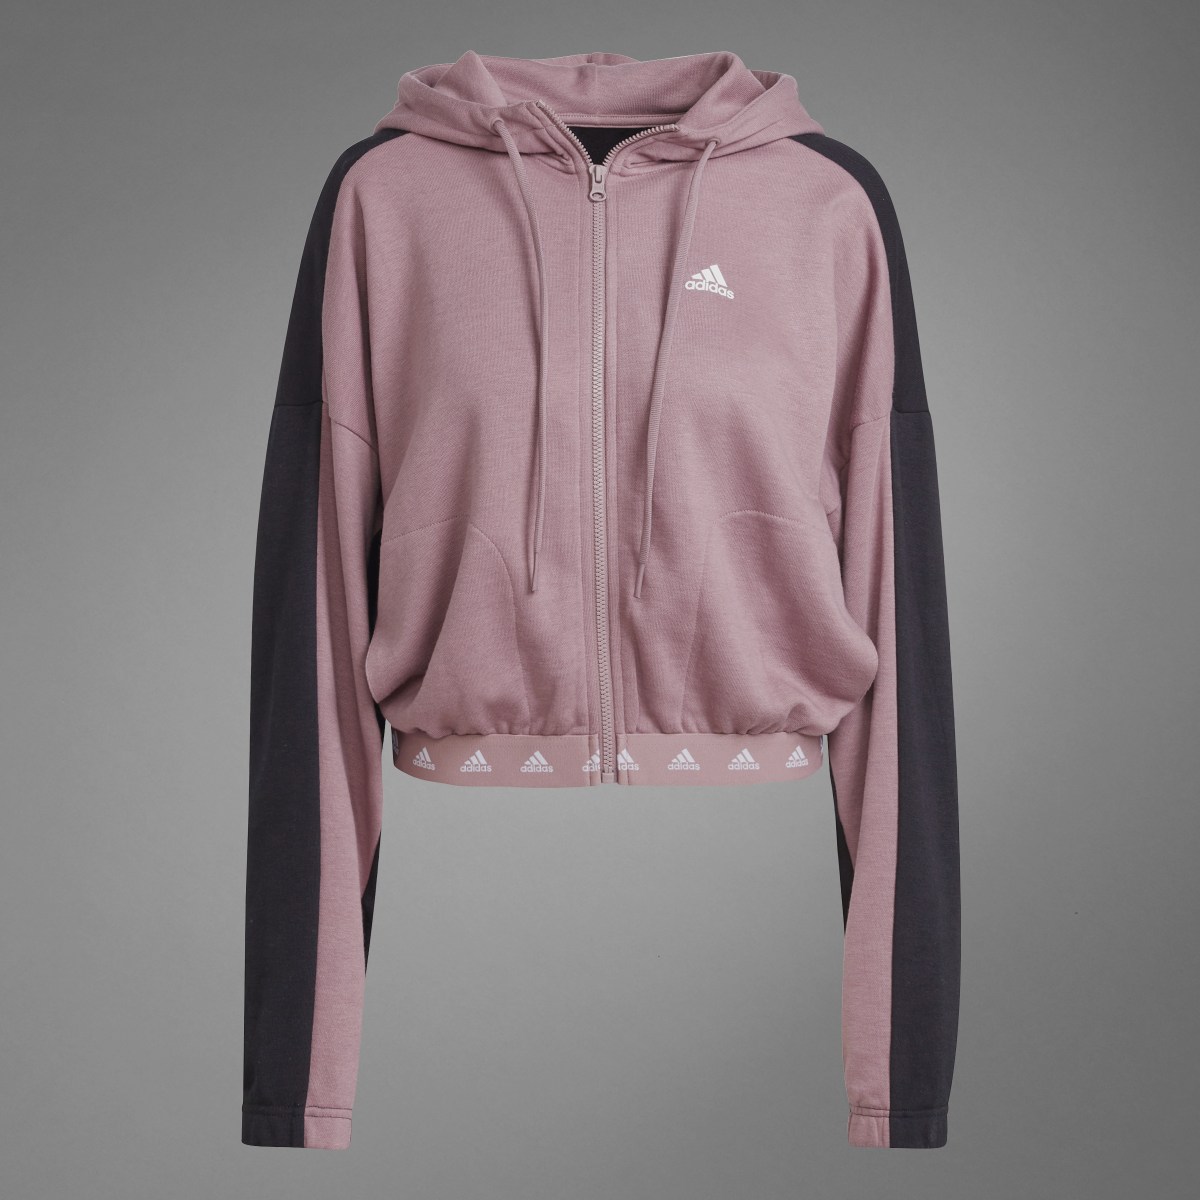 Adidas Hyperglam French Terry Hoodie. 10